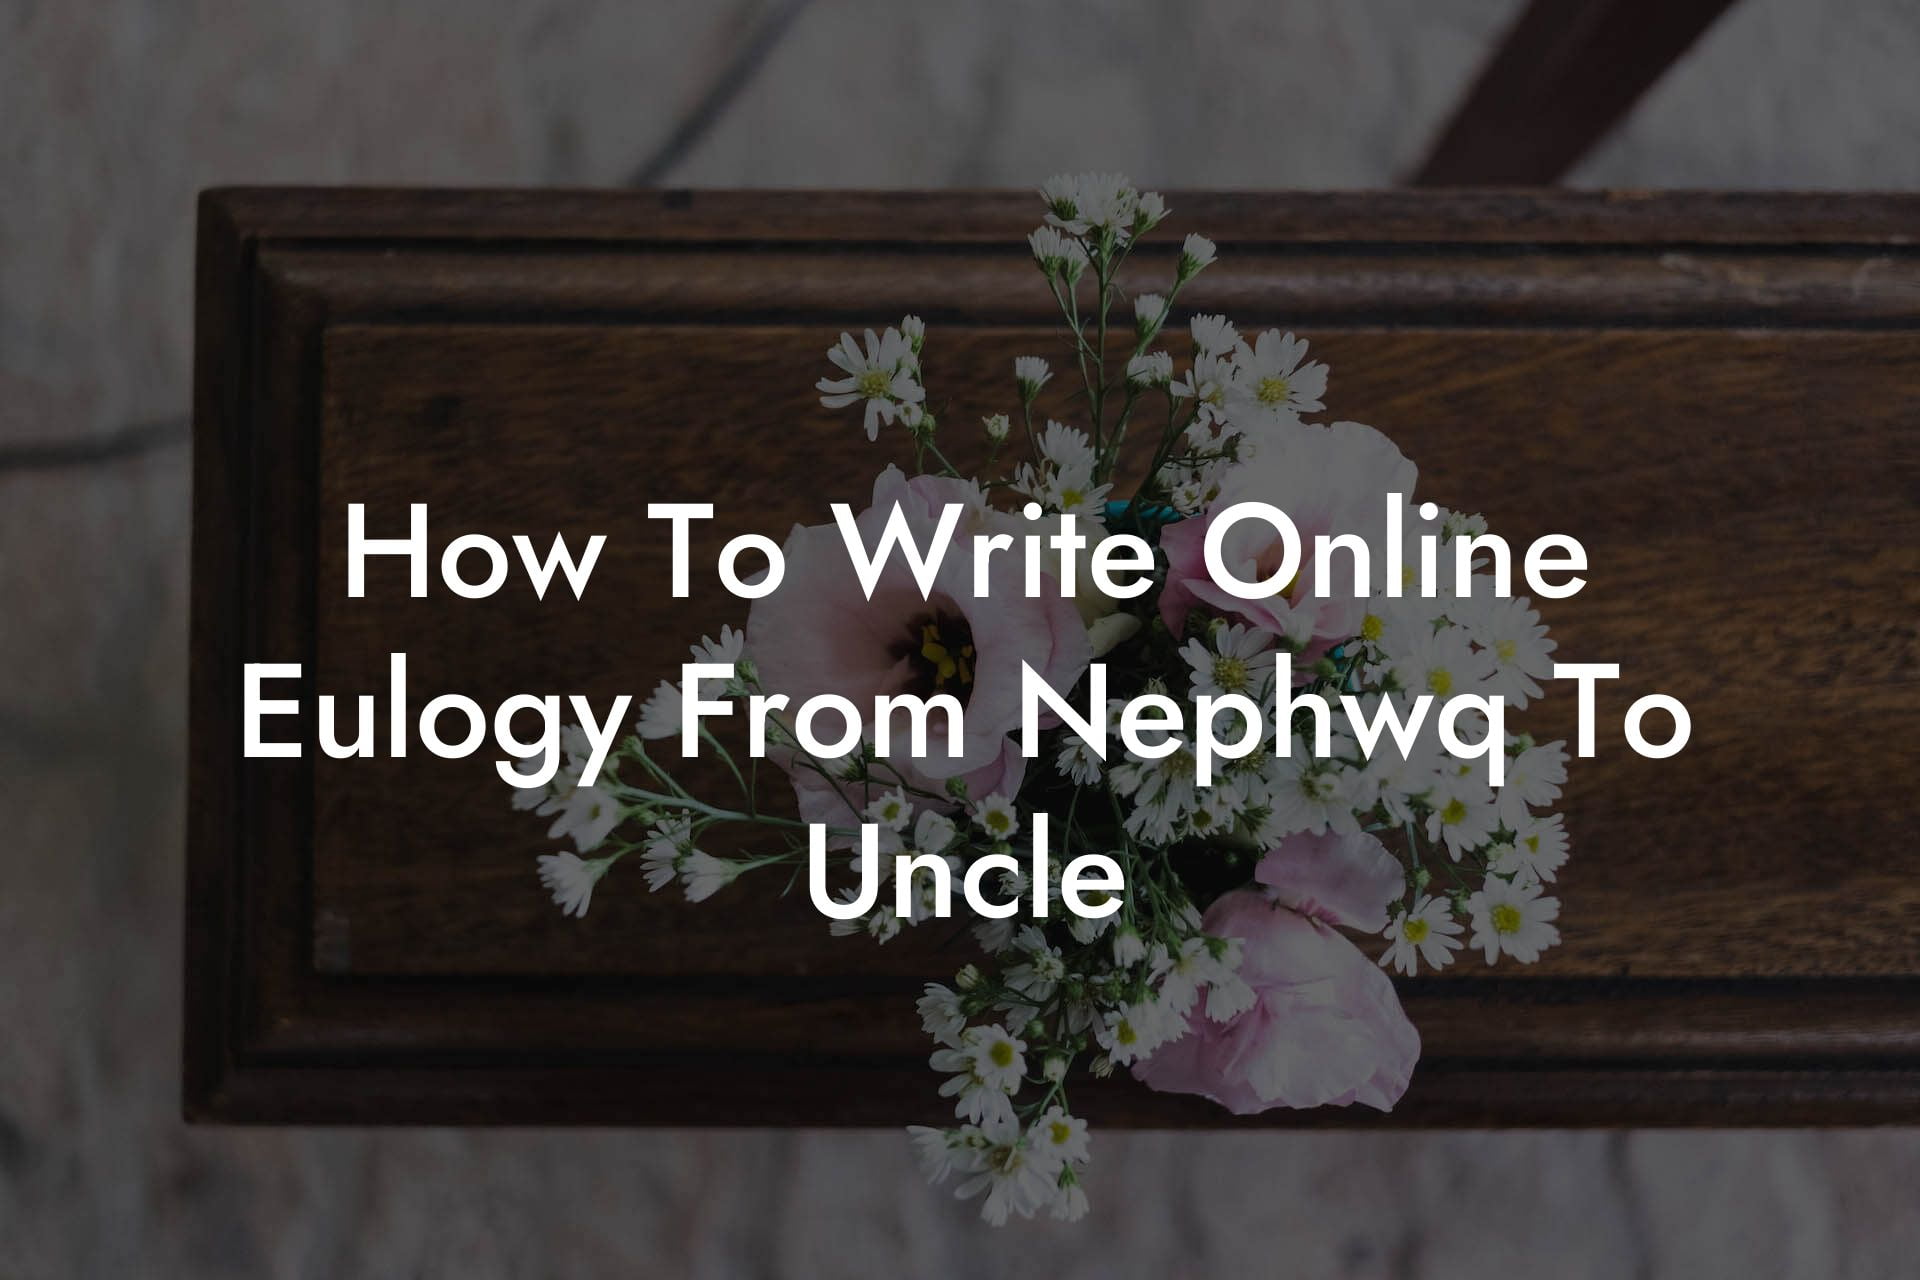 How To Write Online Eulogy From Nephwq To Uncle